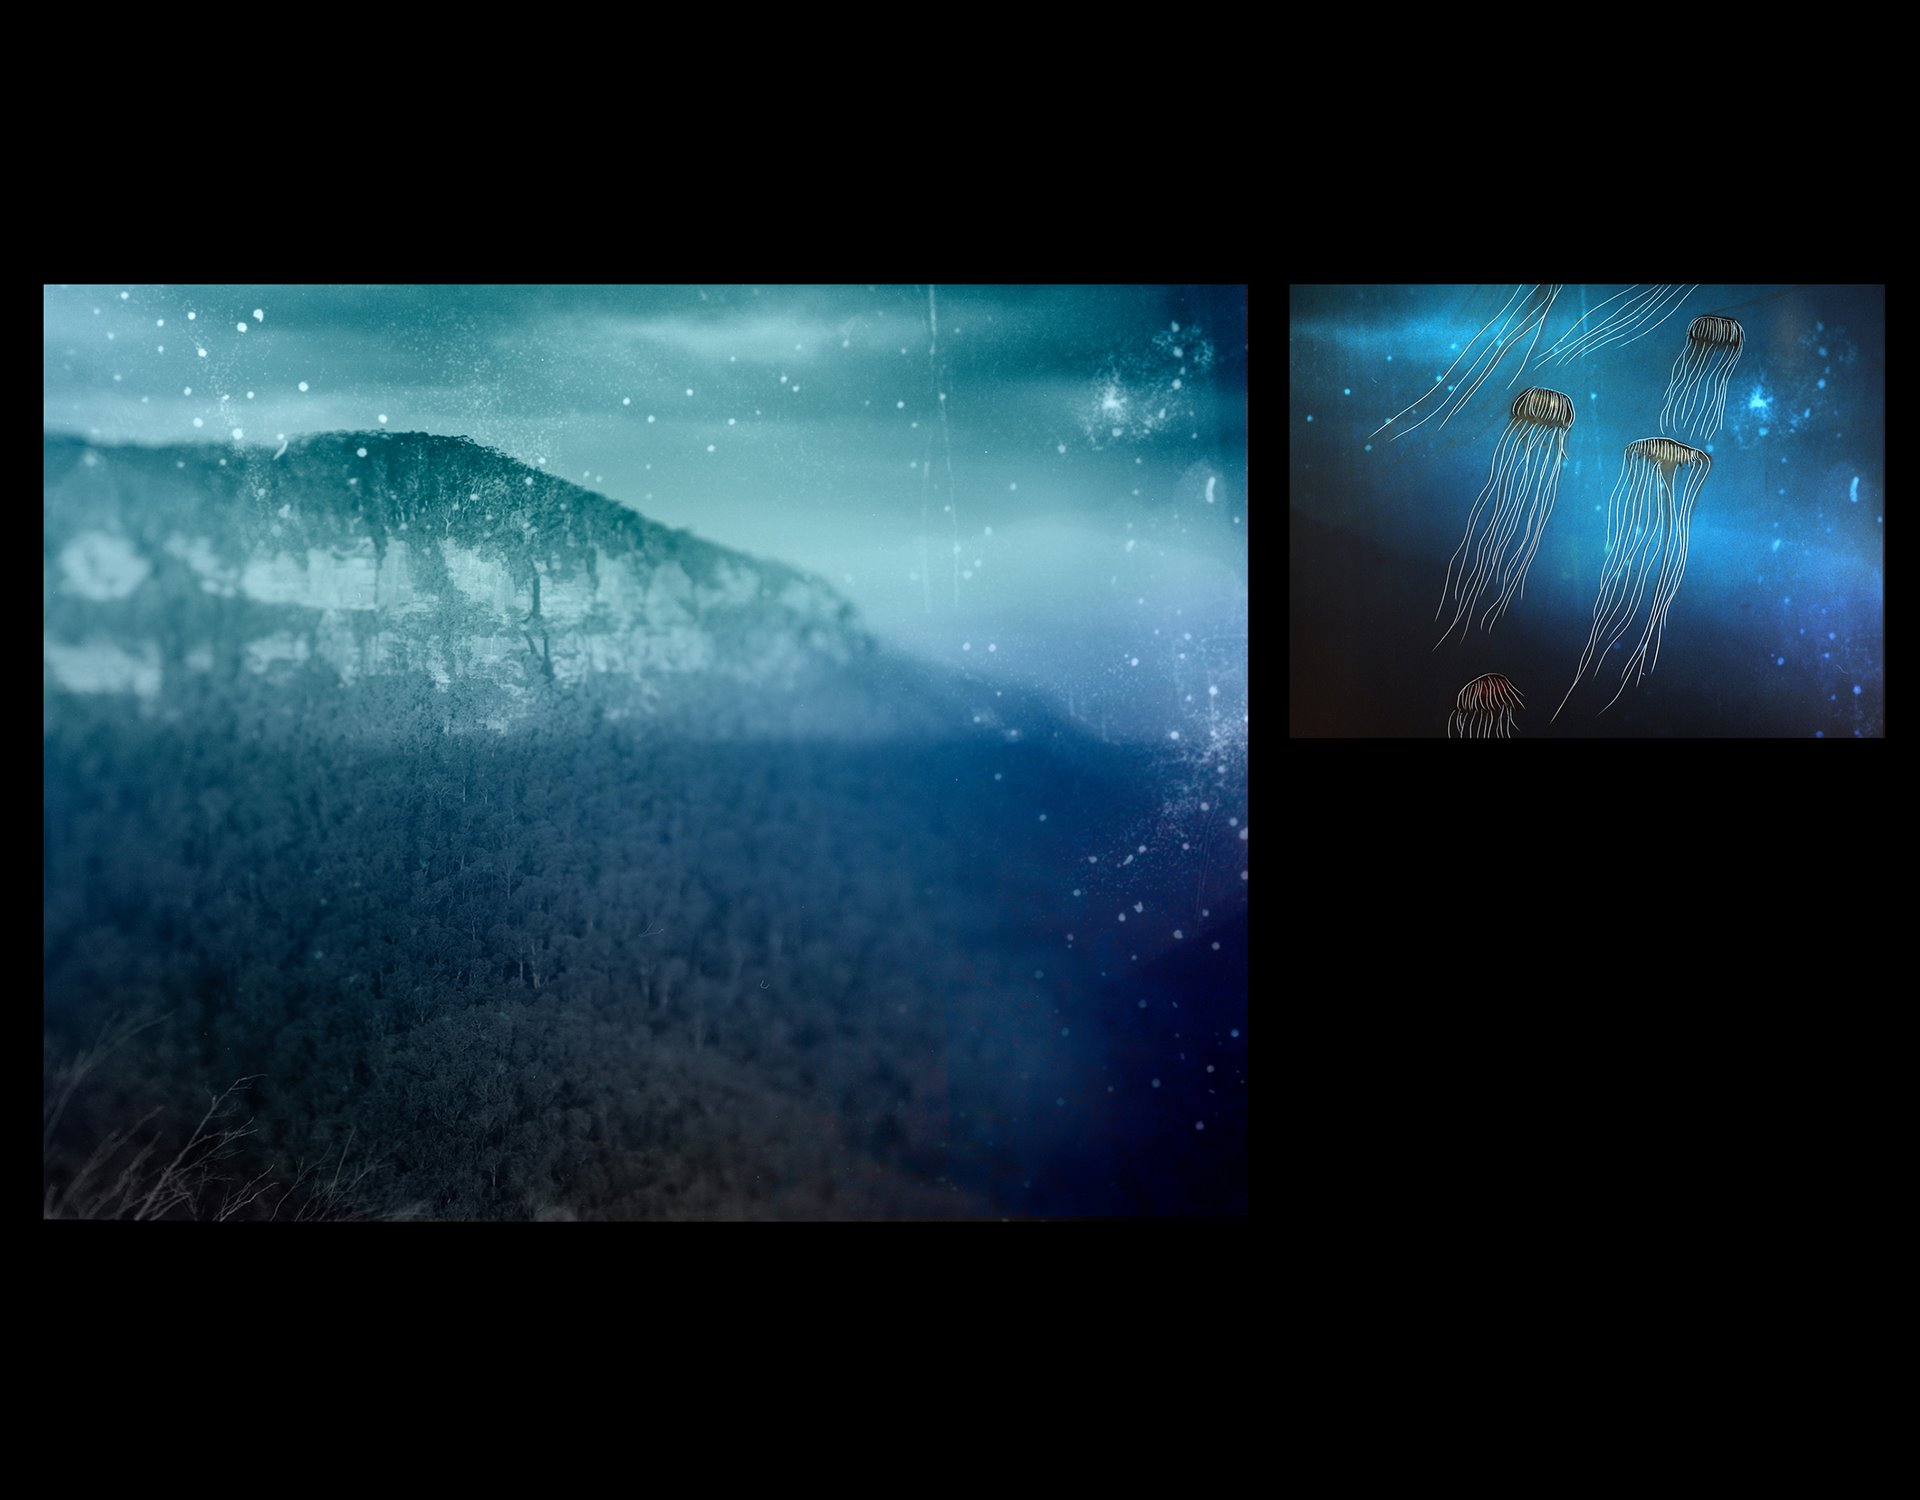 (Left) A reimagined view of the Blue Mountains, Australia. The photograph has been painted with oils and inks by the photographer. The Greater Blue Mountains World Heritage Area (WHA) is located within the Country of six first nations: Darkinjung, Dharawal, Dharug, Gundungurra, Wonnarua, and Wiradjuri Traditional Owners. (Right) Pacific Sea nettle Jellyfish, United Kingdom. The photograph was hand printed in the darkroom, scratched, and reworked by the photographer.<br />
(Right) Pacific sea nettle Jellyfish, Horniman Museum and Gardens, London UK. These Jellyfish have been found off the coast of Australia and are also kept in British Museum collections. This image was hand-printed in the colour darkroom by the photographer, and then scratched with a scalpel.